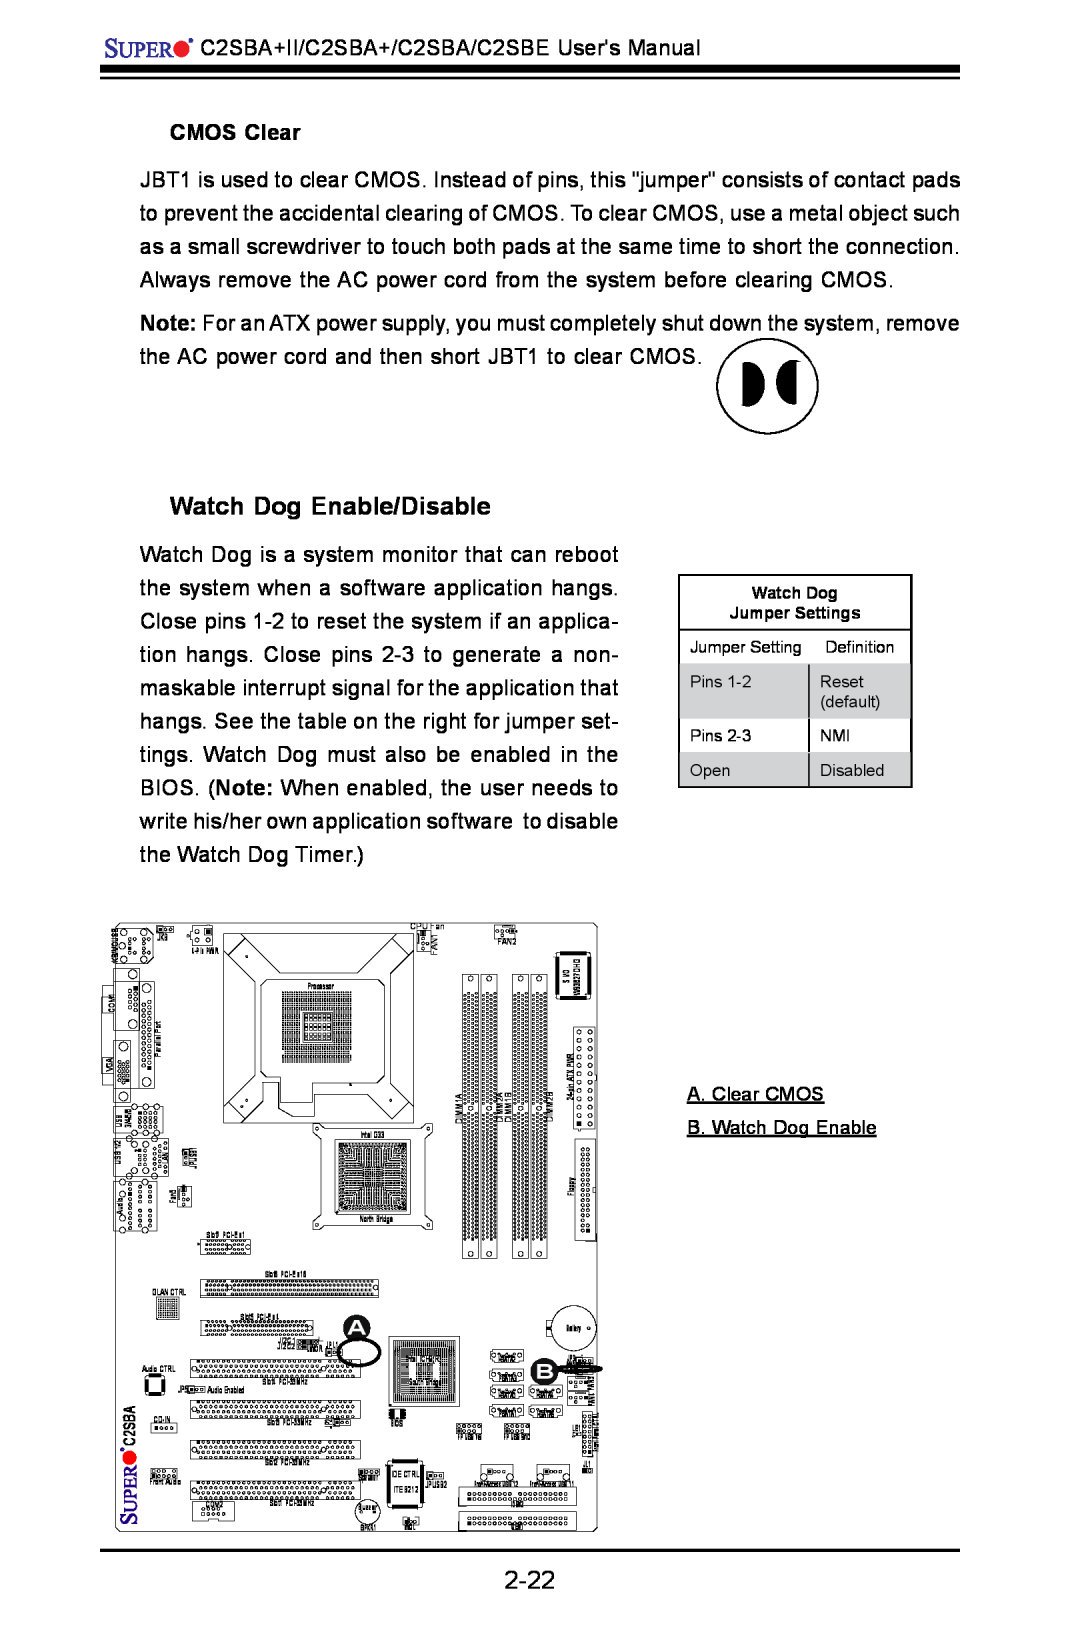 SUPER MICRO Computer C2SBE, C2SBA+II user manual Watch Dog Enable/Disable, CMOS Clear 